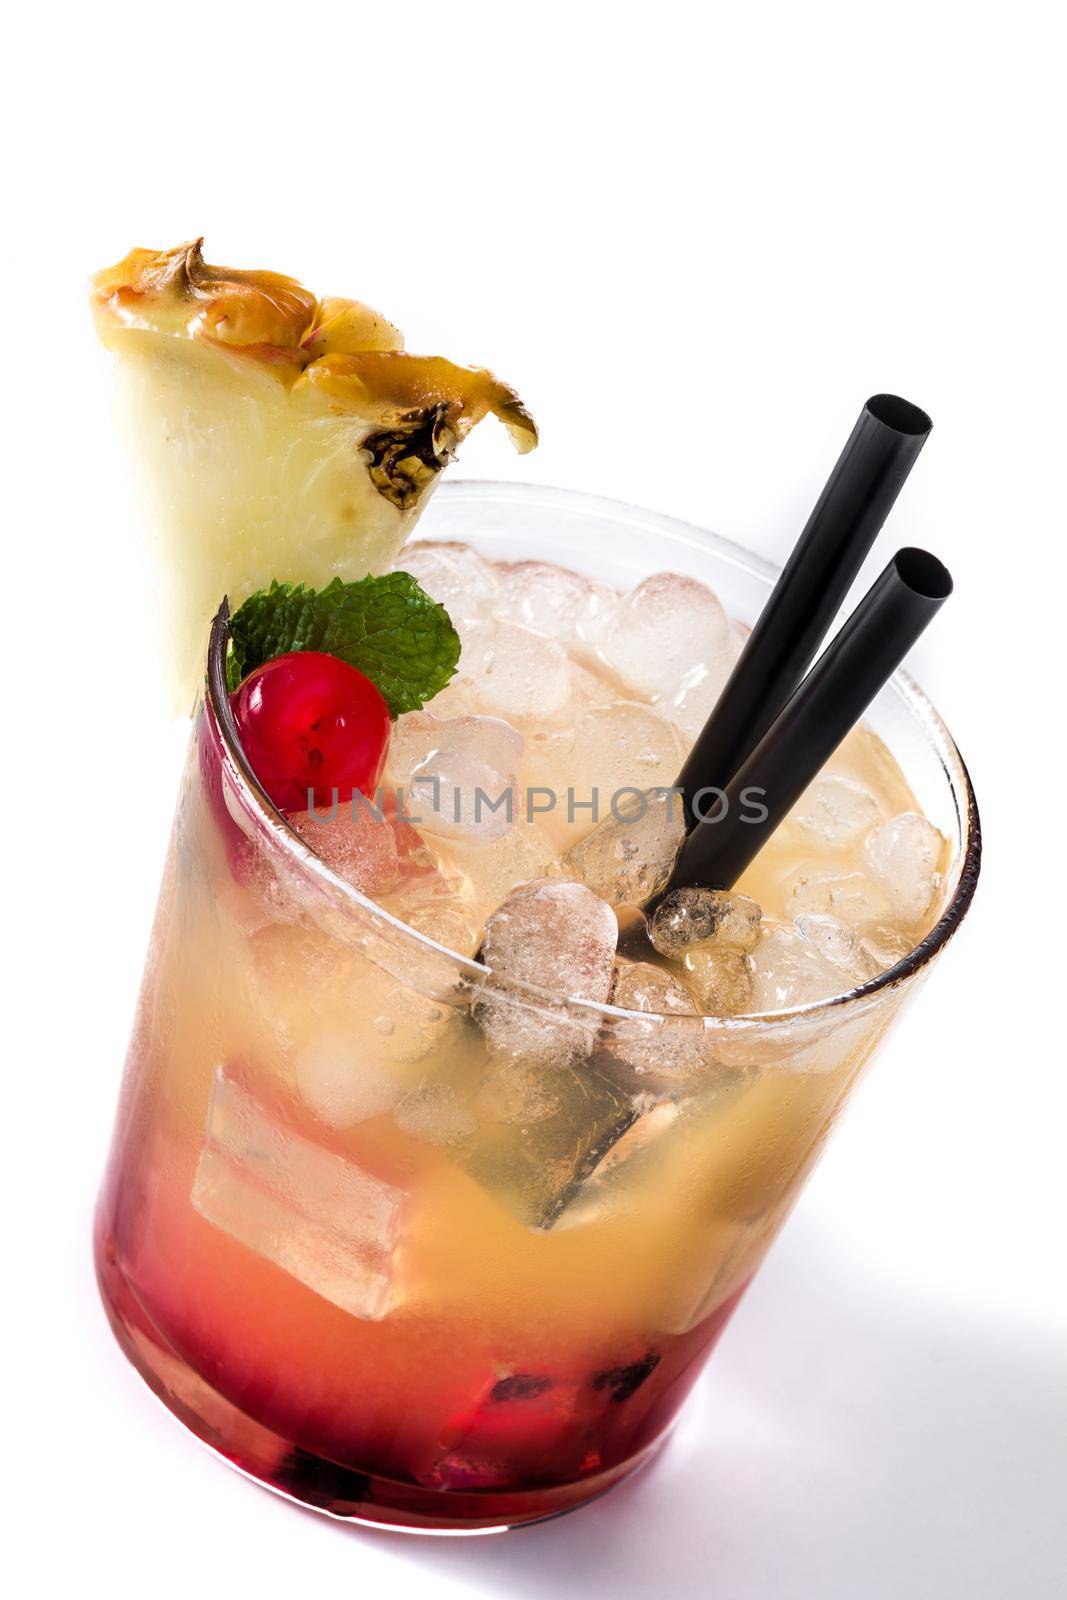 Cold mai tai cocktail with pineapple and cherry  by chandlervid85